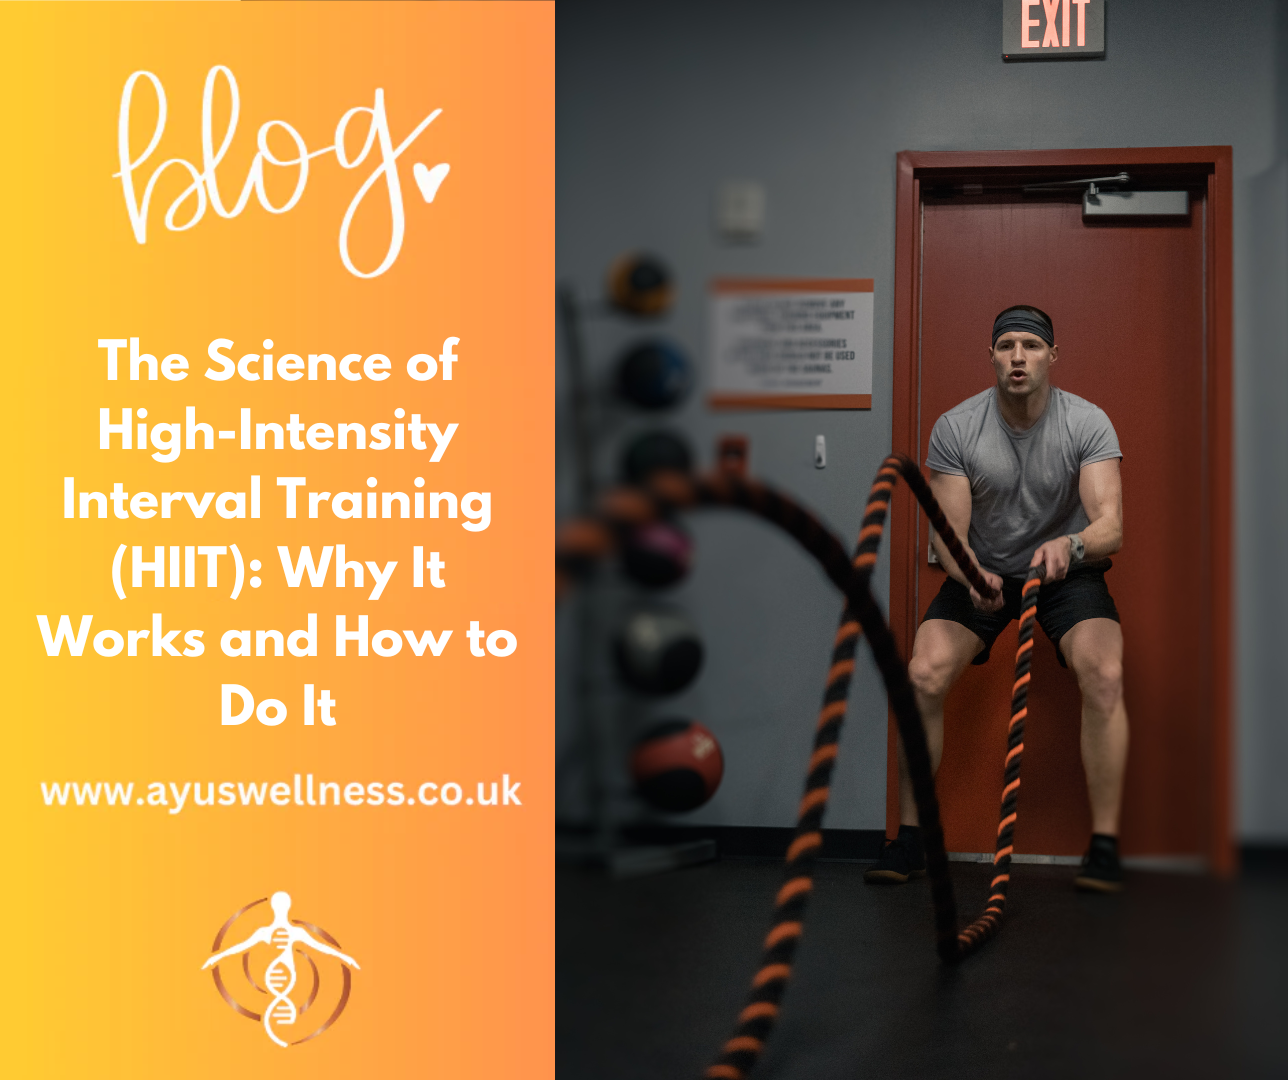 The Science of High-Intensity Interval Training (HIIT): Why It Works and How to Do It